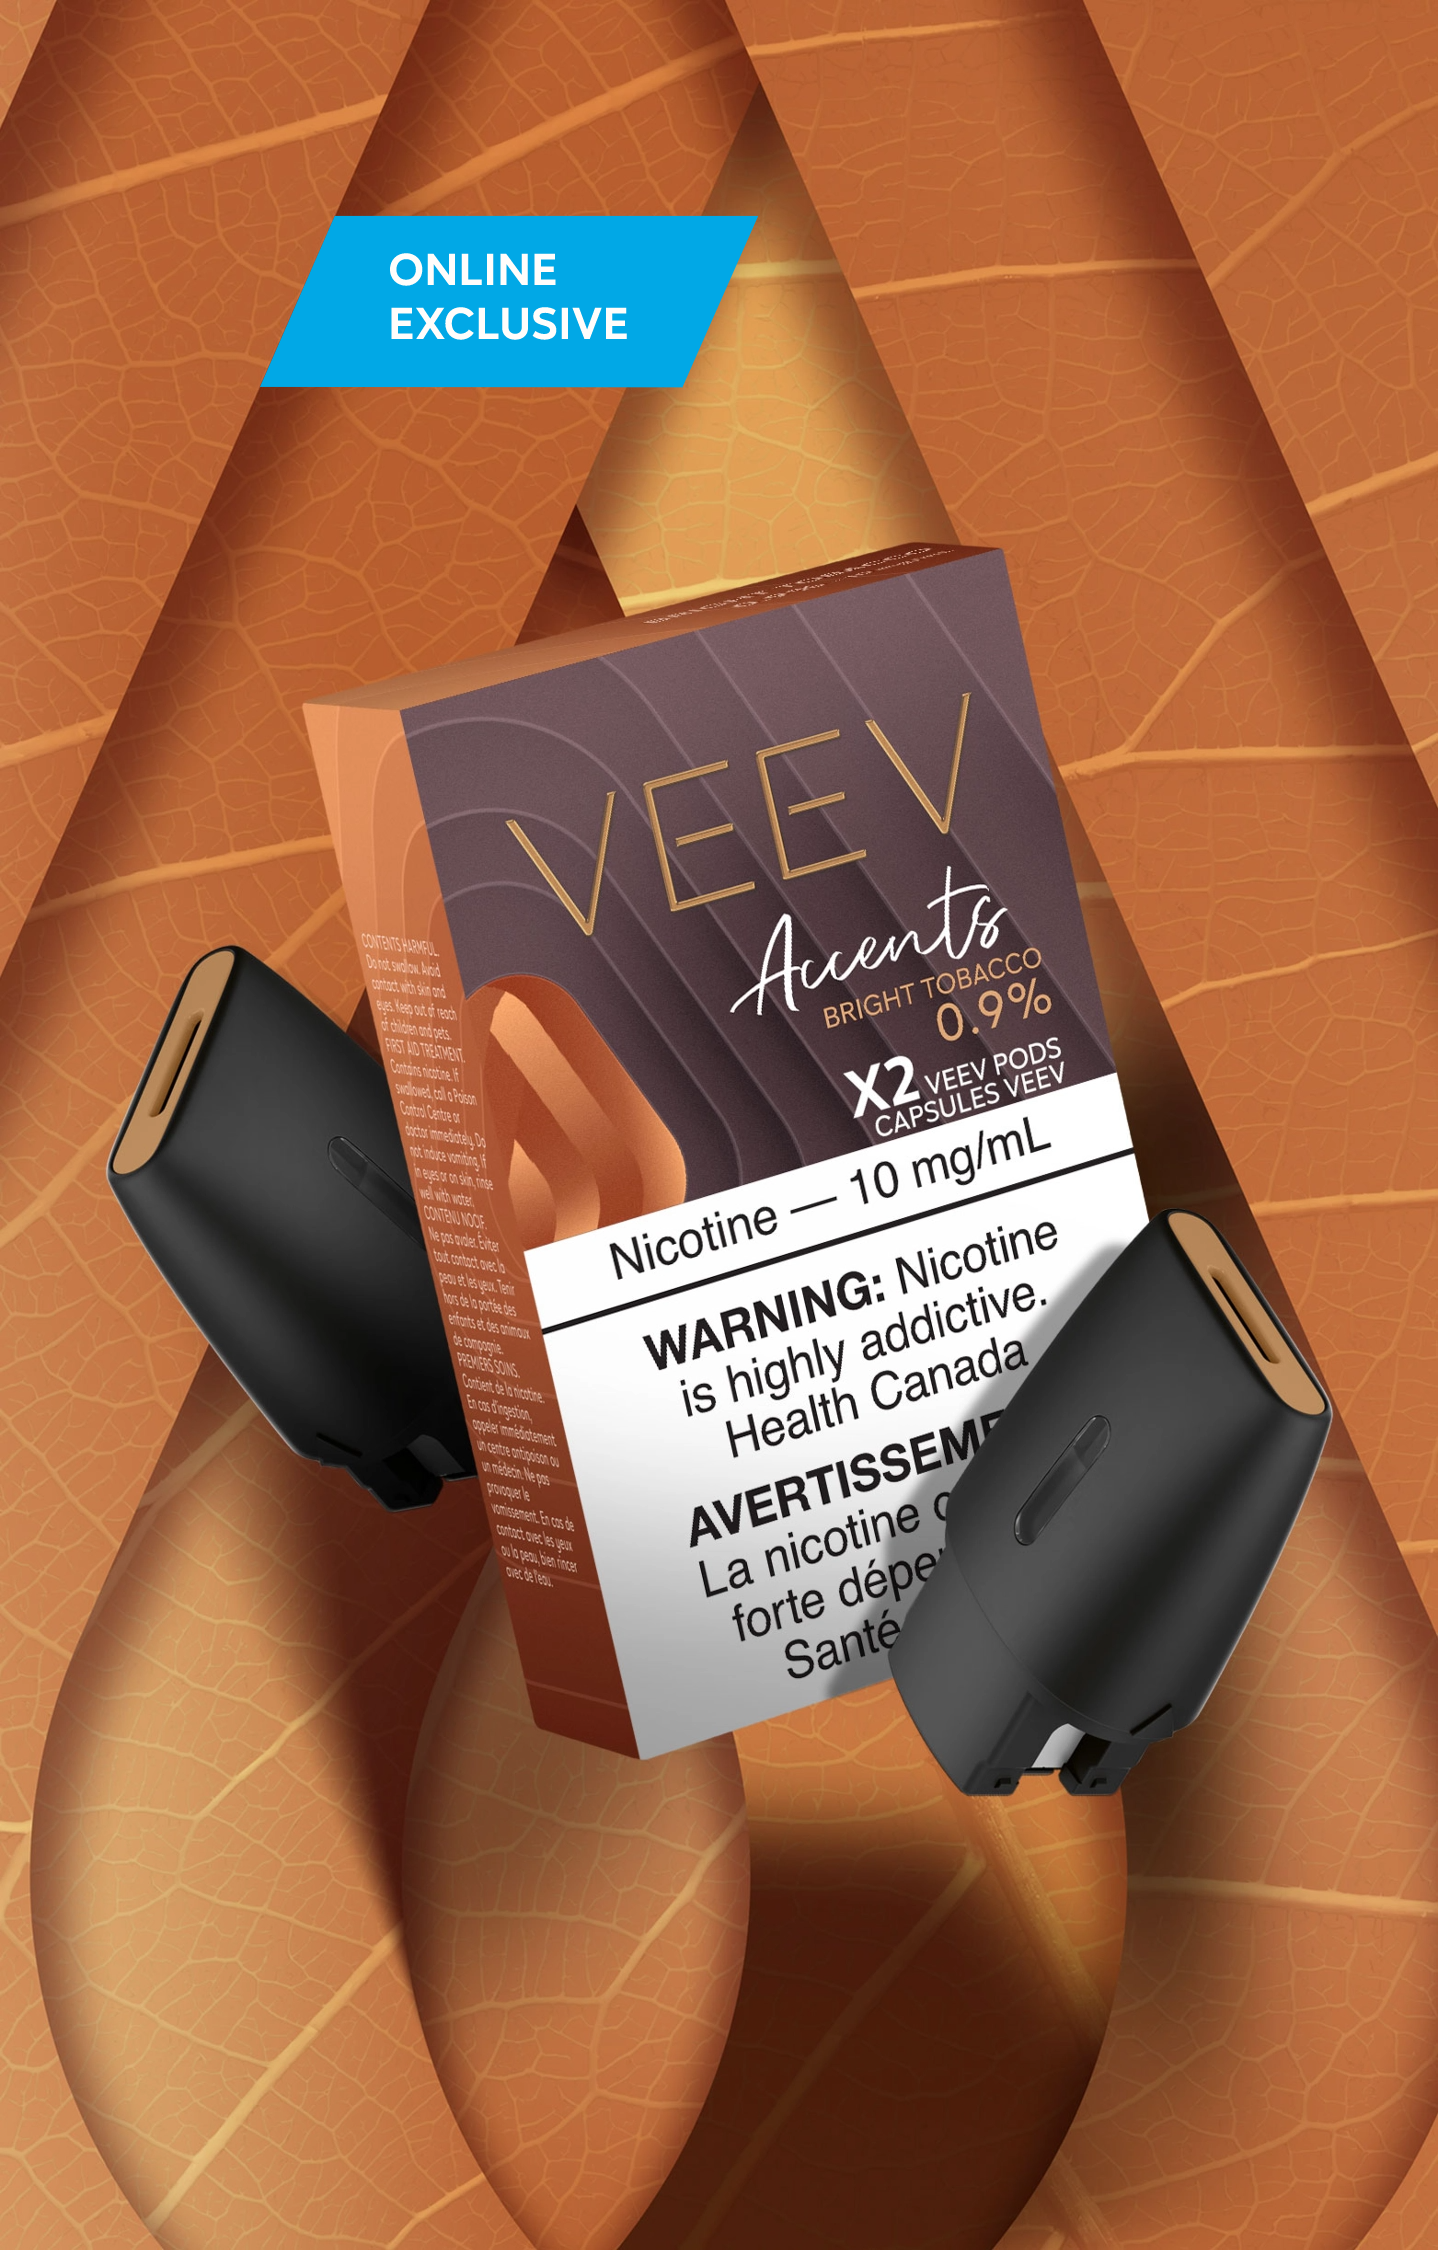 VEEV Accents Bright Tobacco pack